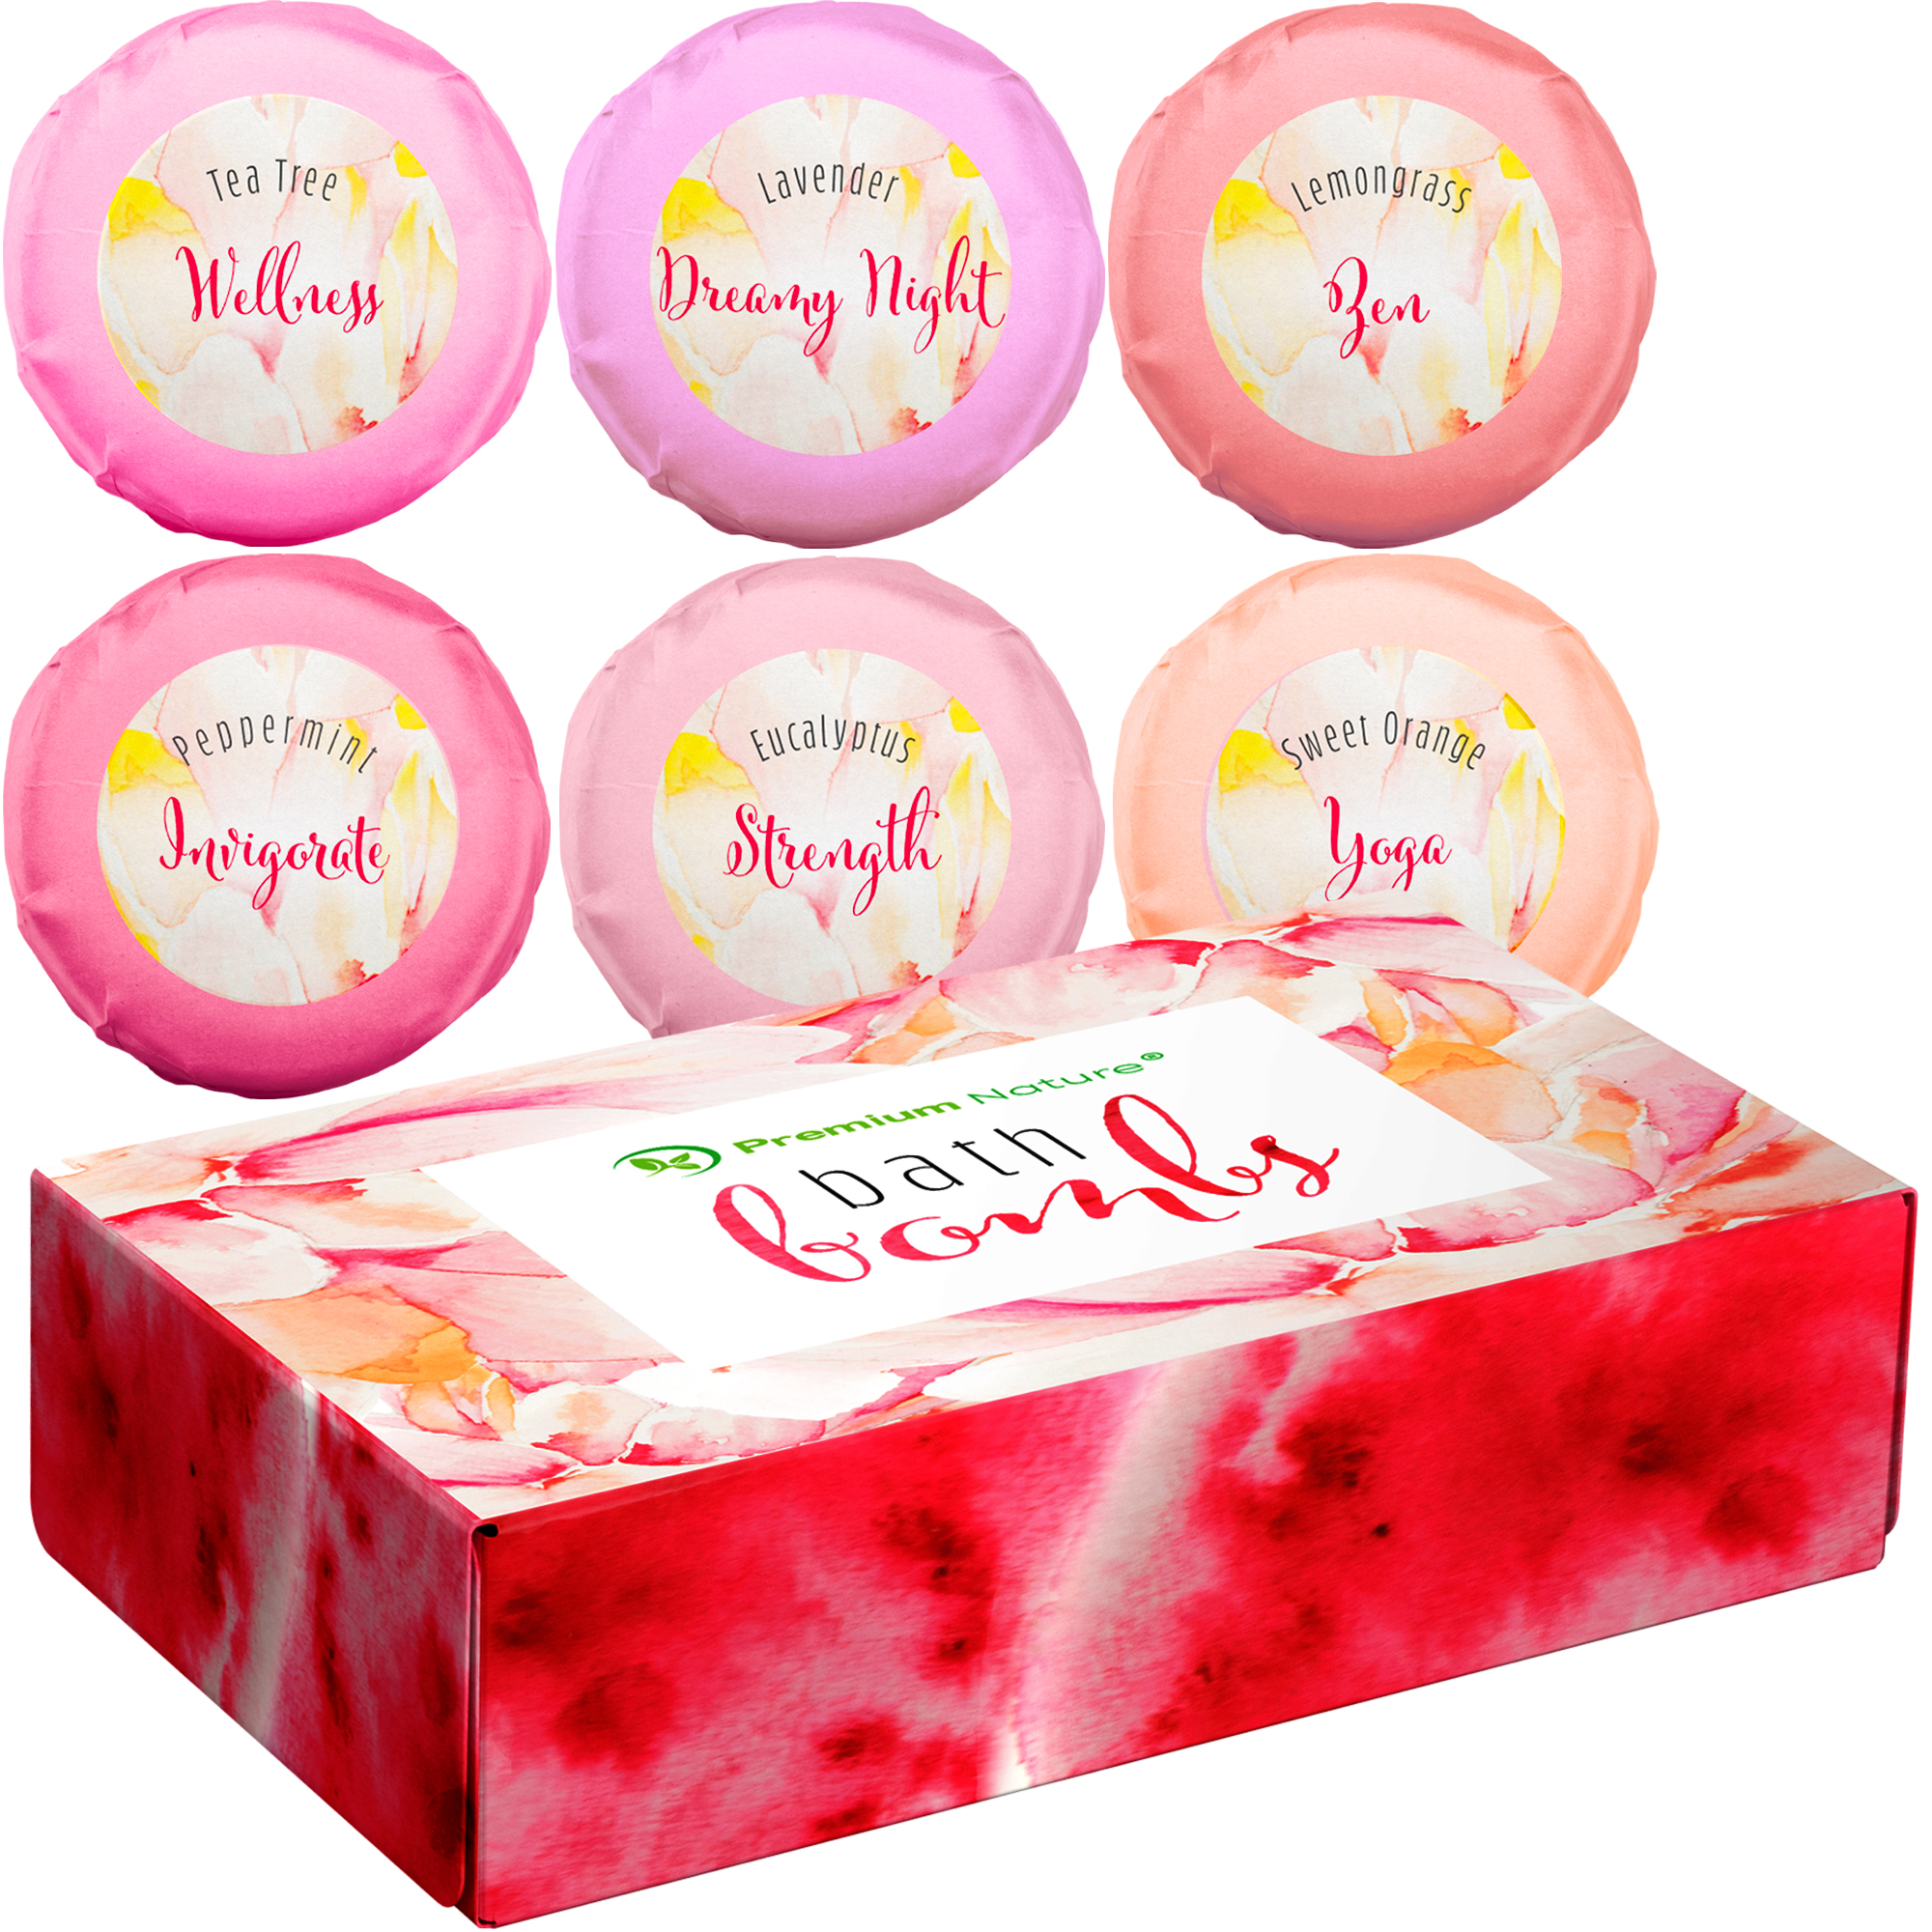 Premium Nature Bath Bombs Gift For Her - Gifts Fizzy For Relaxation by Premium Nature - image 1 of 6